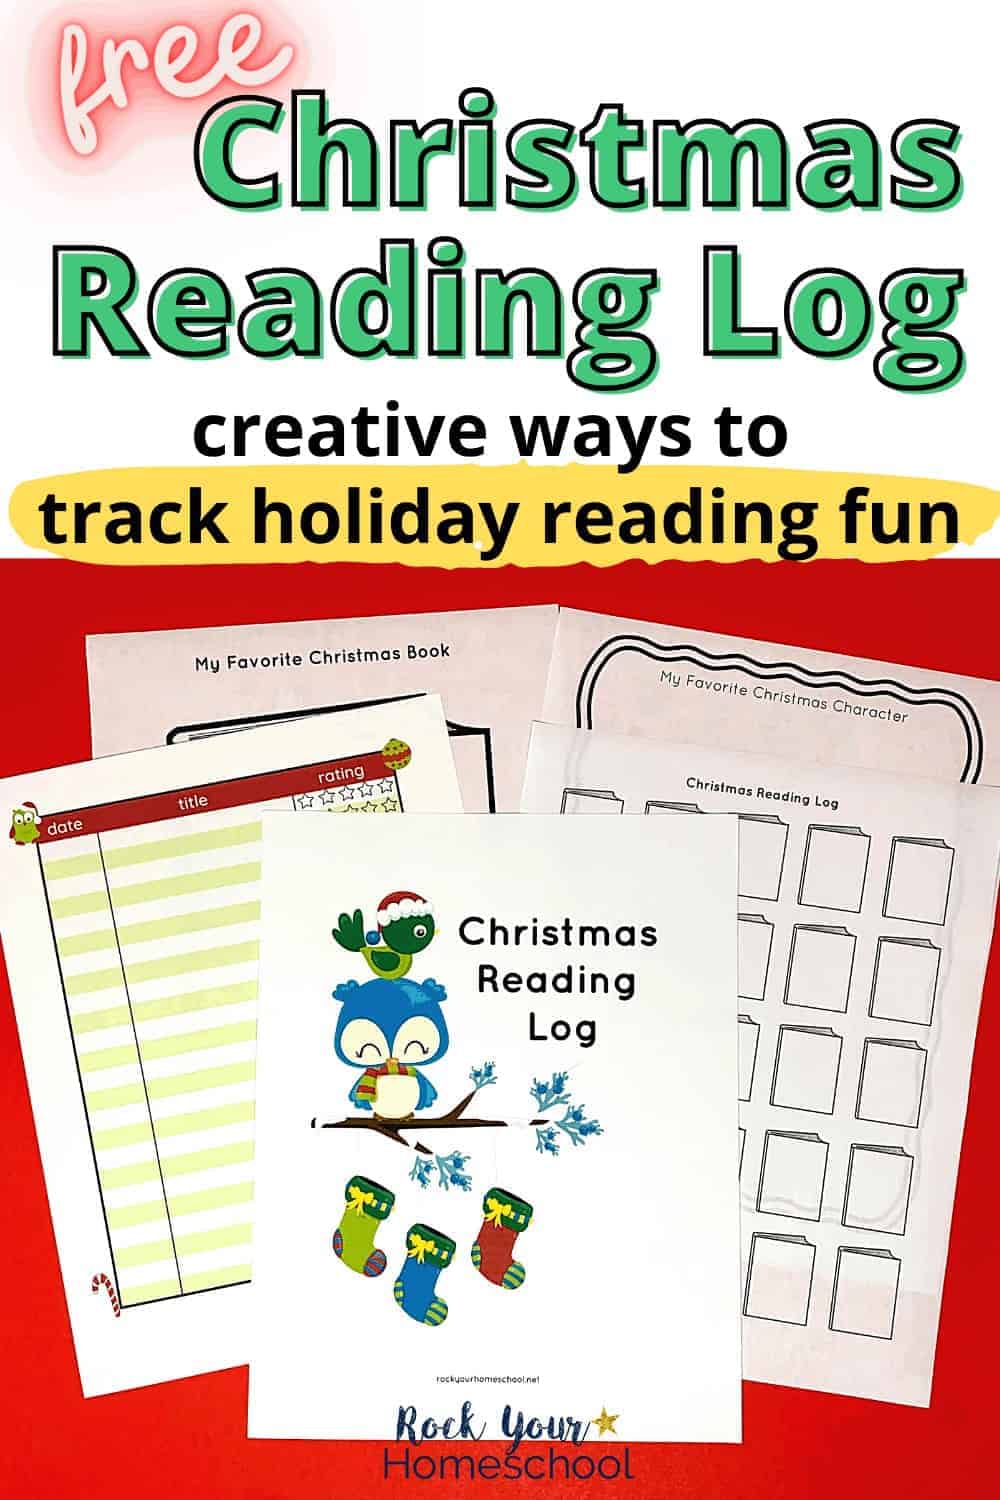 Free Christmas Reading Log Pack for Special Holiday Fun